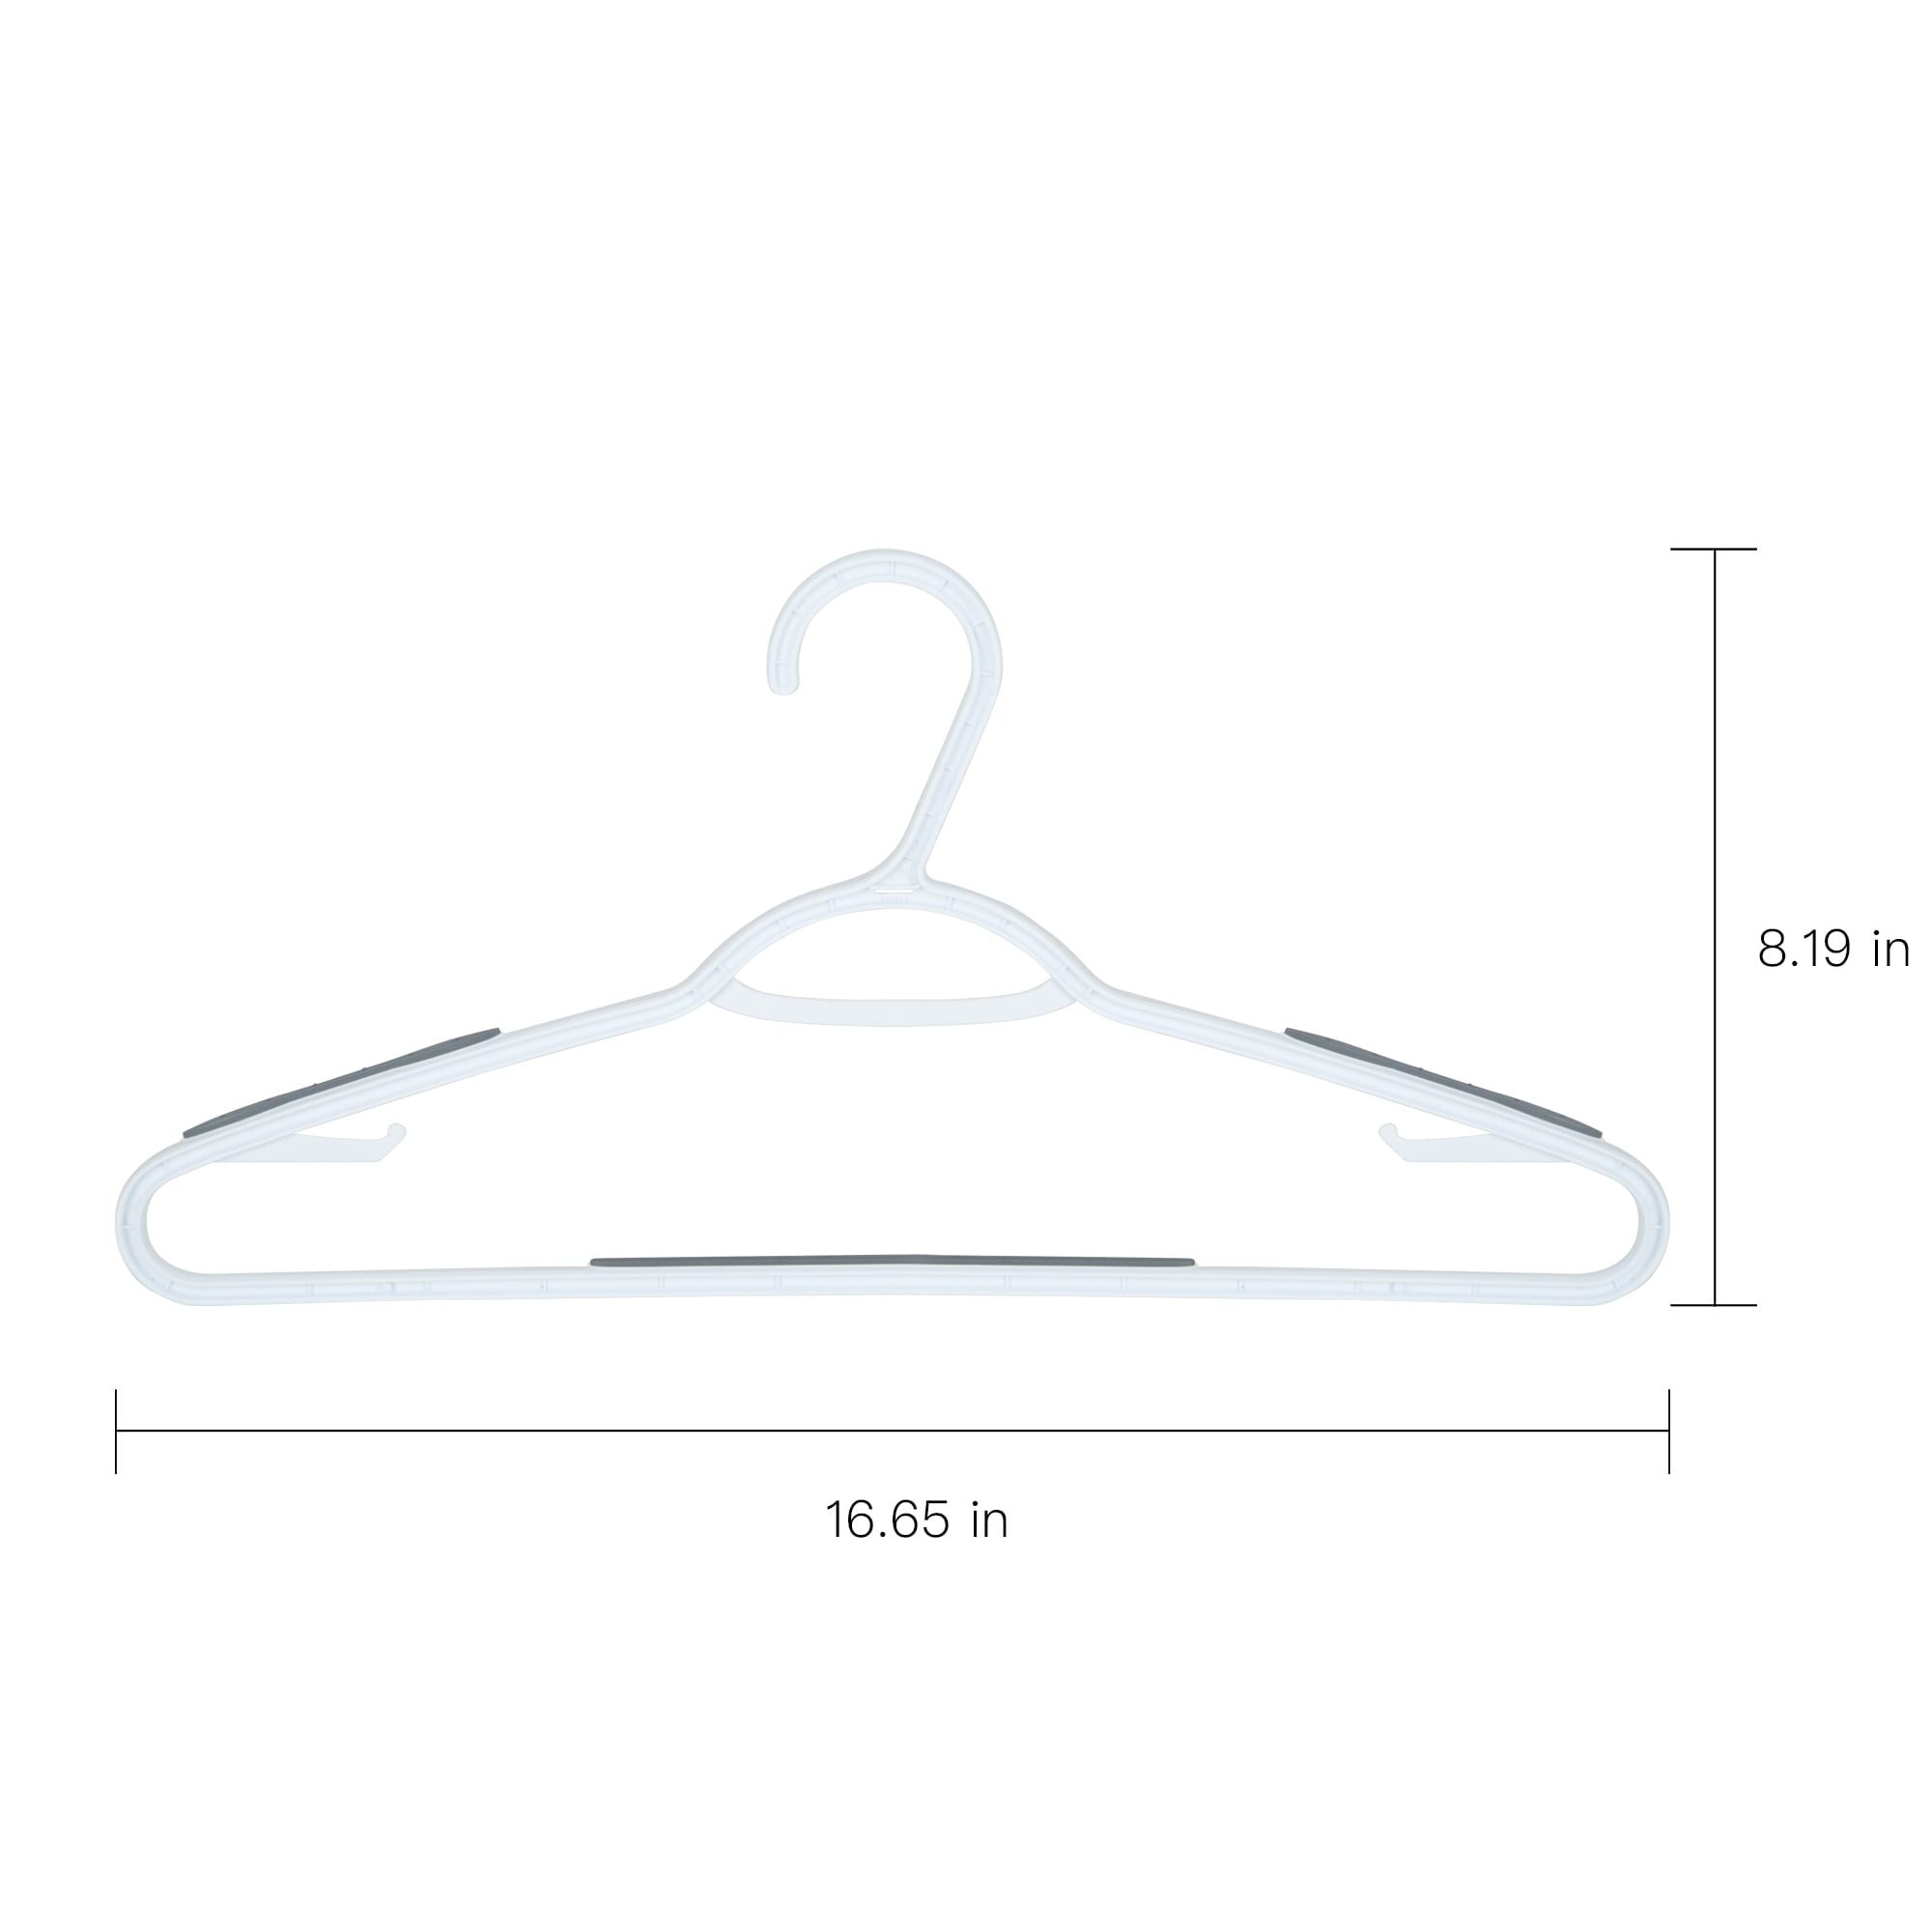  100pk Made in USA Plastic Clothes Hangers Bulk, 20 30 50 100  Pack Available, Laundry Clothes Hanger, Coat Hangers Plastic, Heavy Duty  Plastic Hanger for Closet Hangars